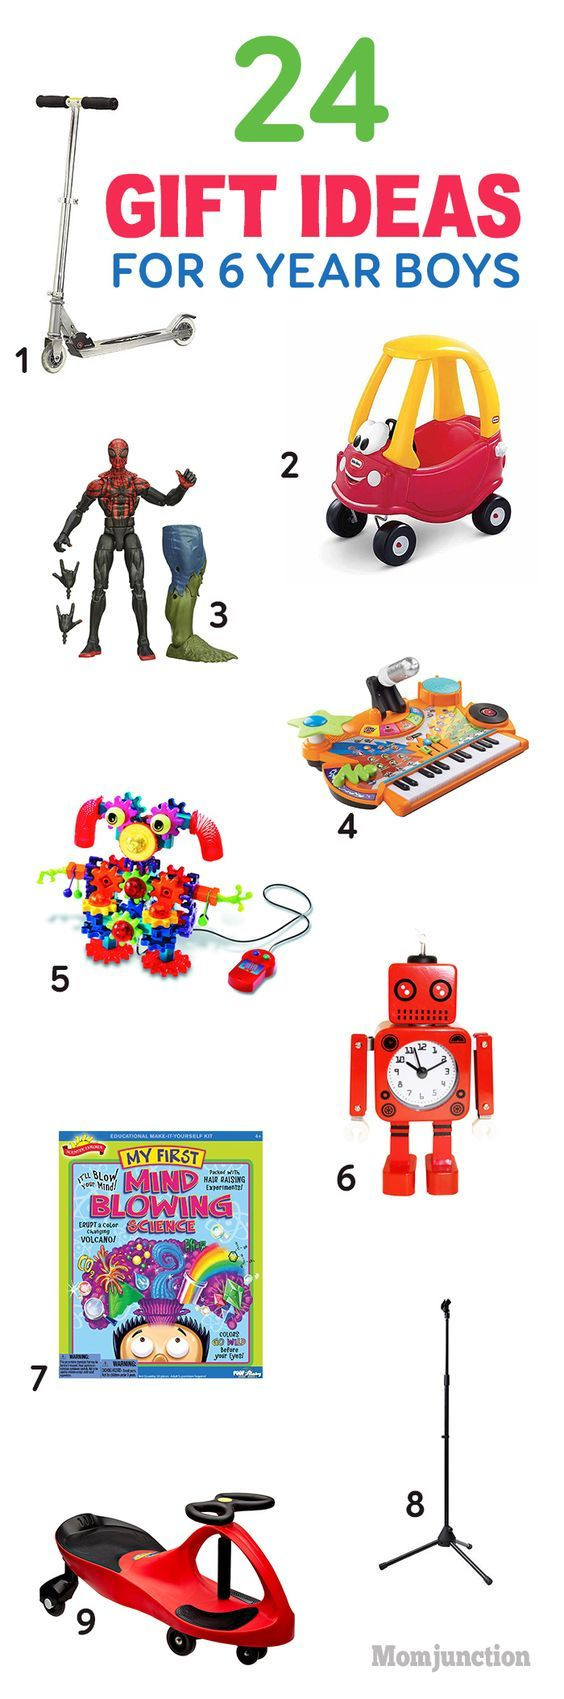 Christmas Gift Ideas 6 Year Old Boy
 21 best Gift Ideas Boys 3 to 7 images on Pinterest